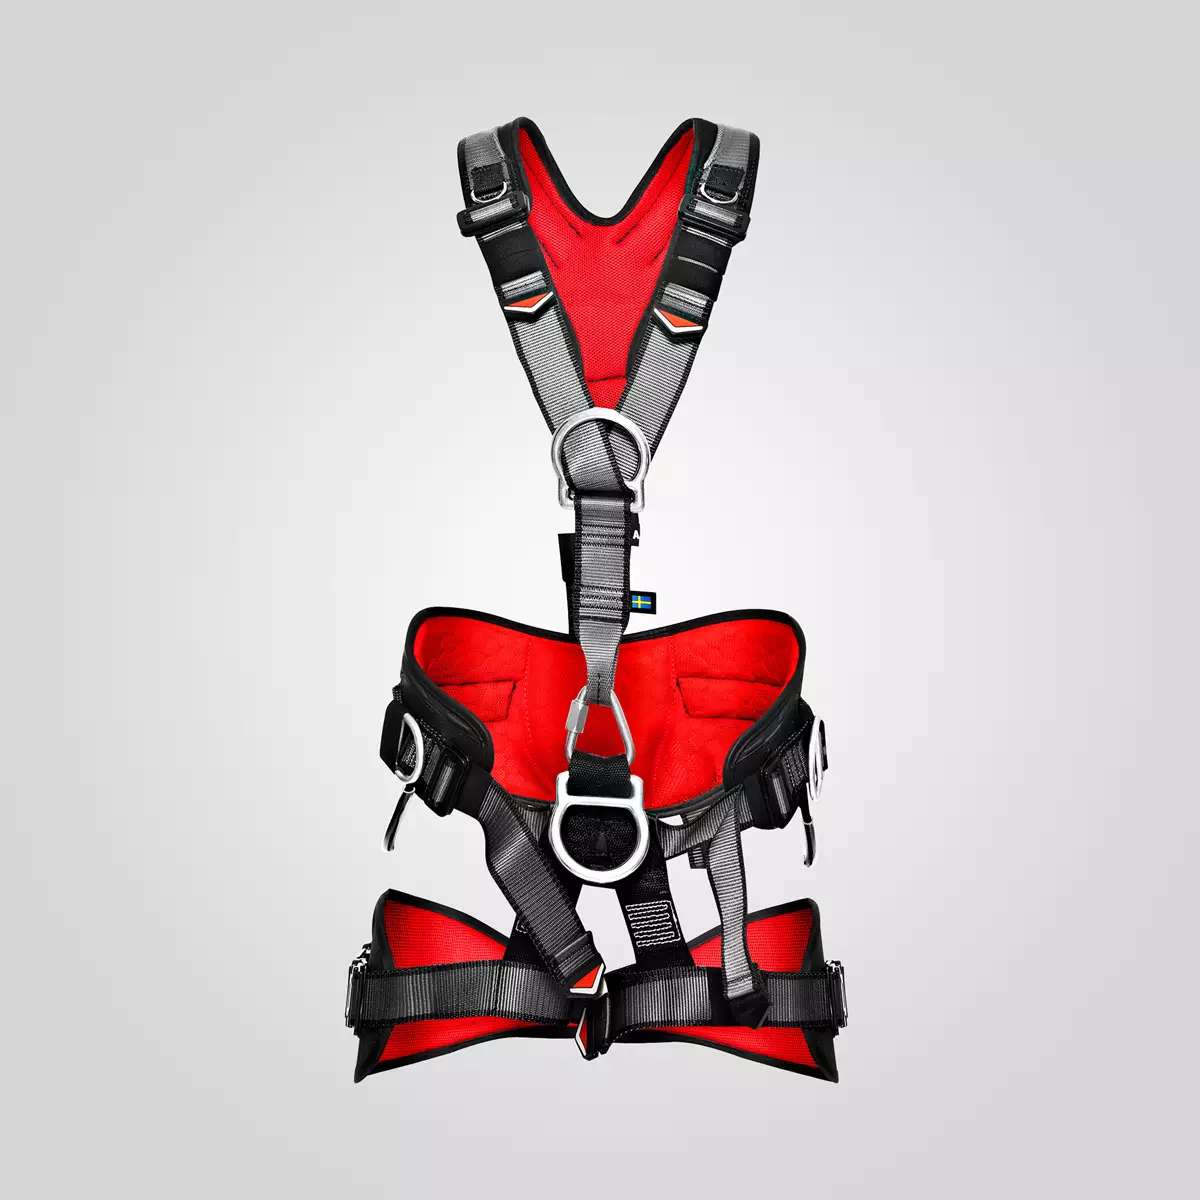 Harness for suspension